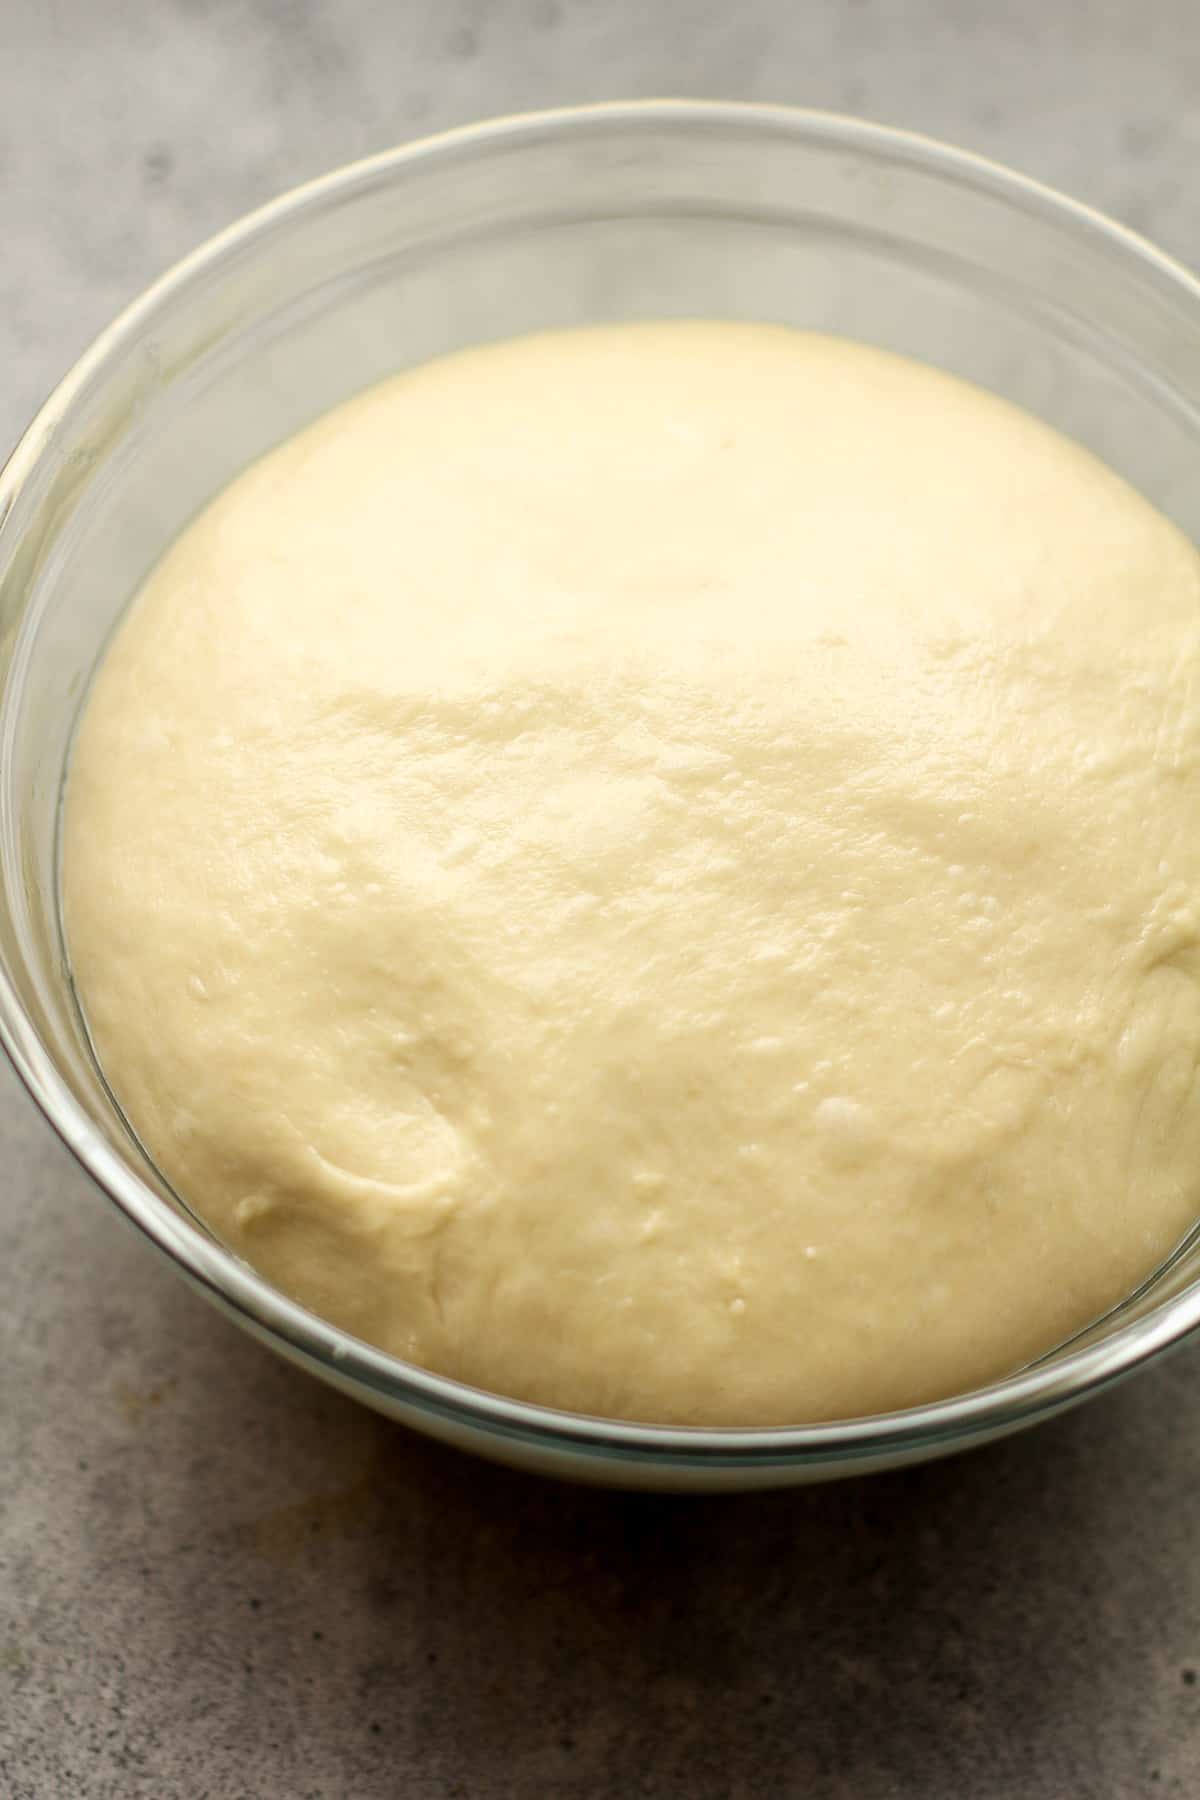 The dough in a bowl, after rising.